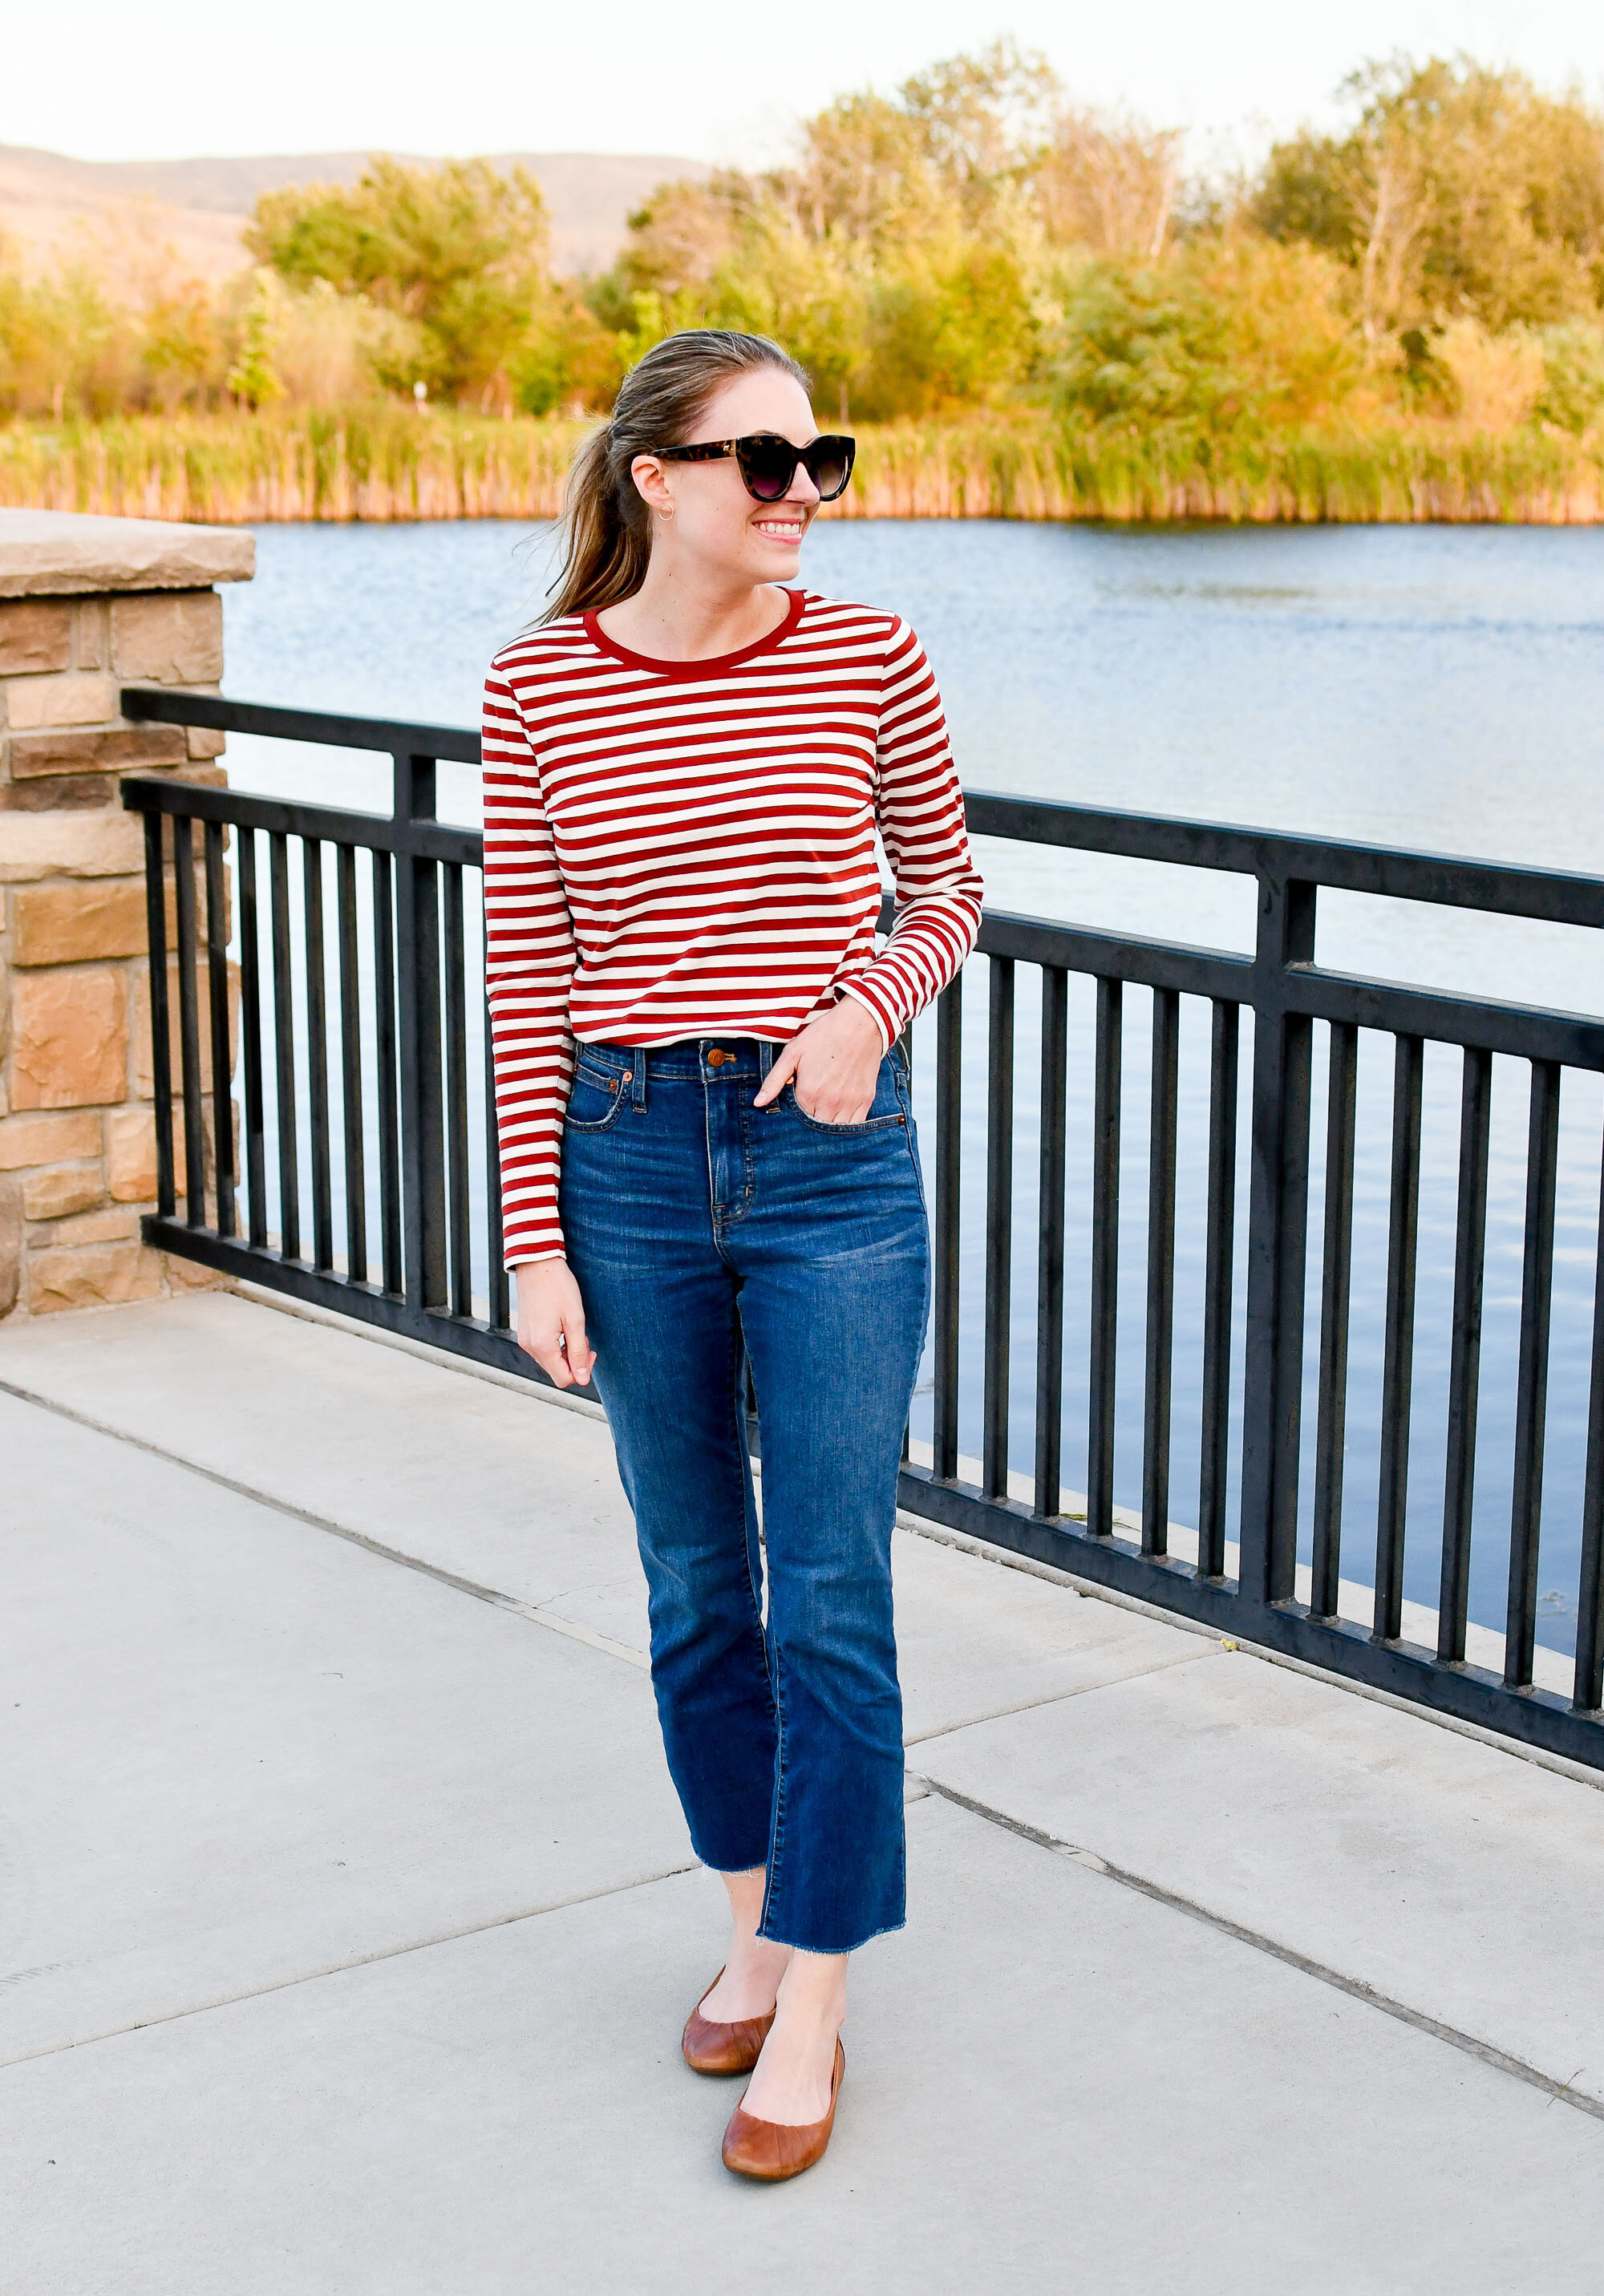 Favorite outfit: Madewell Idaho — Cotton Cashmere Cat Hair